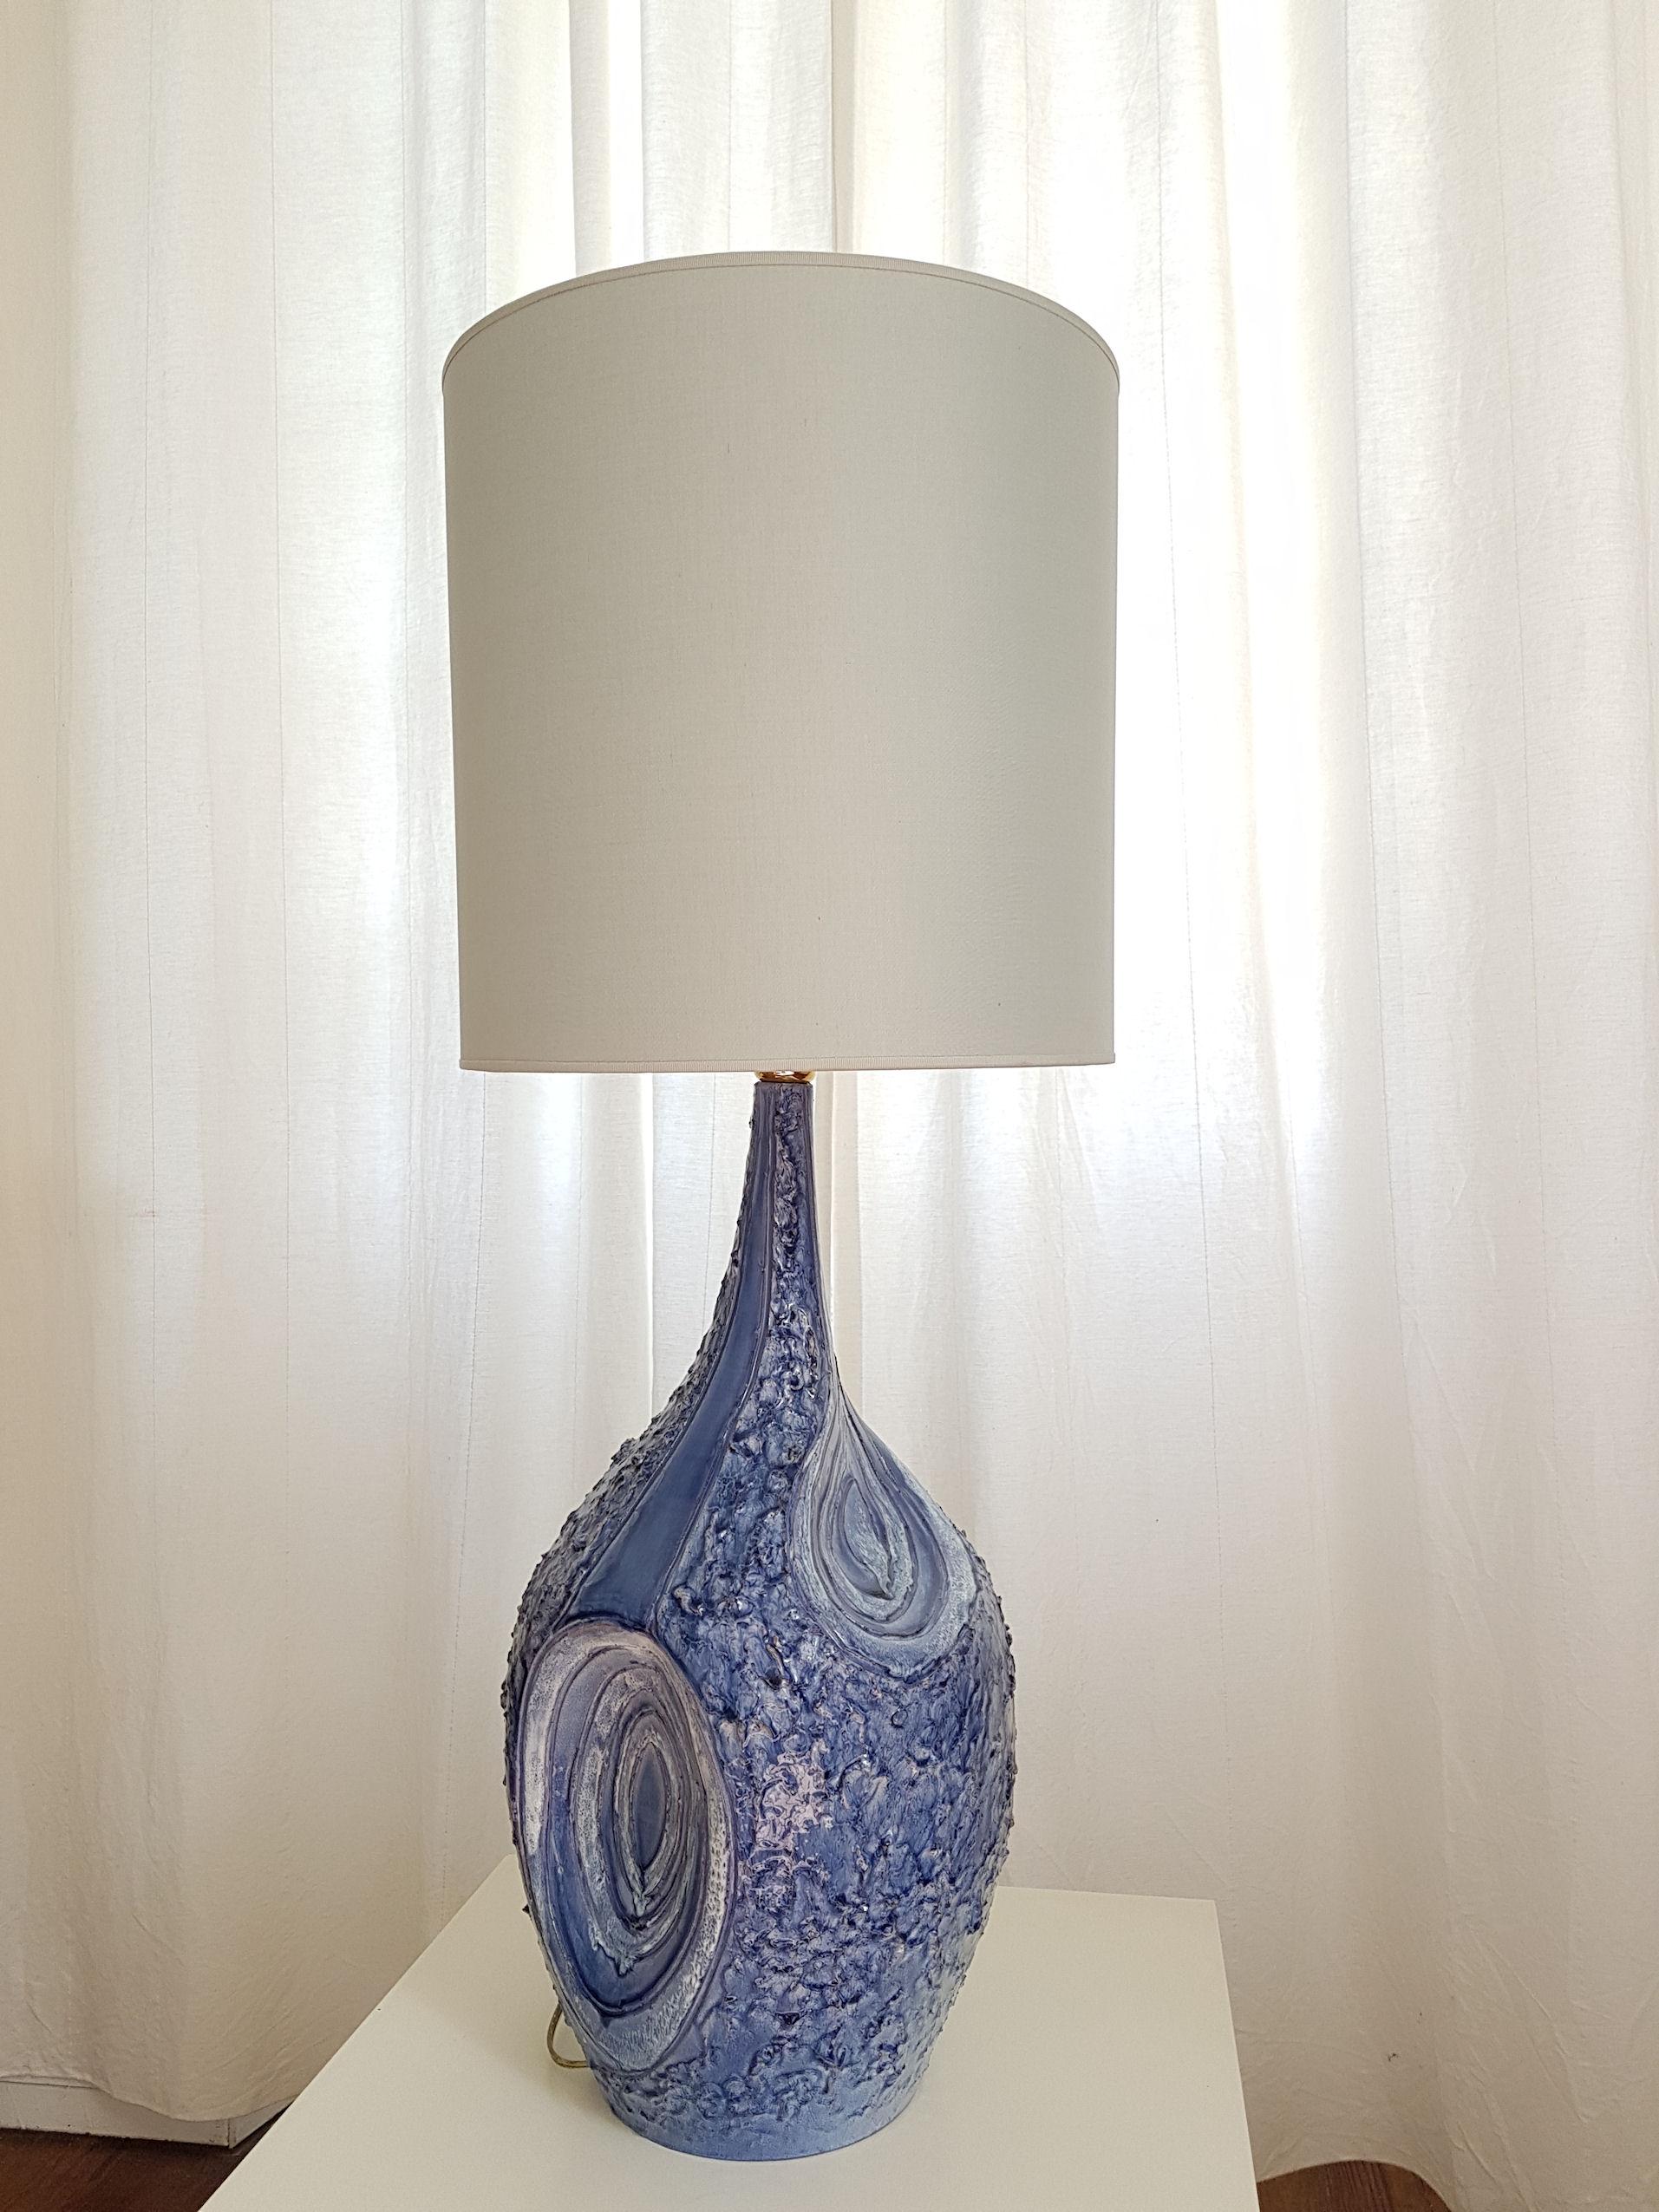 Large handcrafted blue and white ceramic pair of table lamps, signed by the artist, Italy, 1980s.
The Vintage lamps ceramic work is textured, creating an irregular surface, with different hues of blue, and white.
The Mediterranean style lamps have